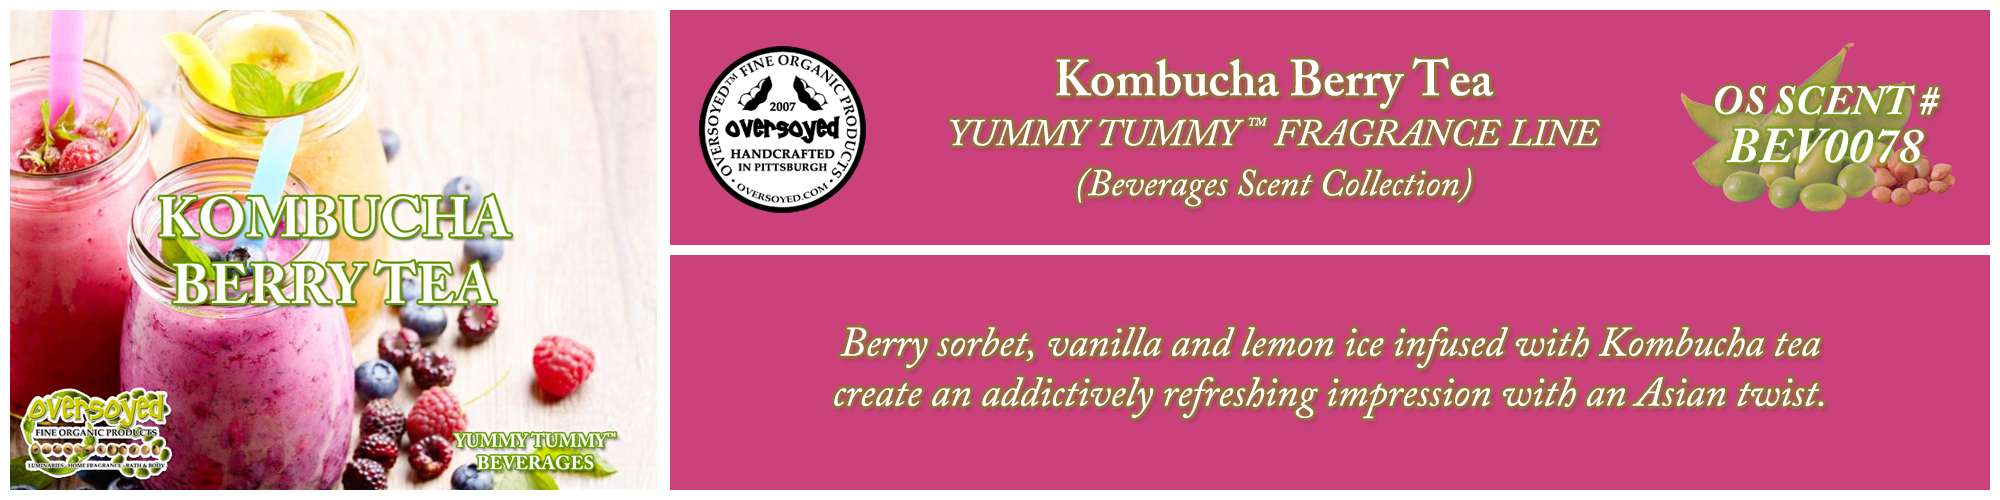 Kombucha Berry Tea Handcrafted Products Collection